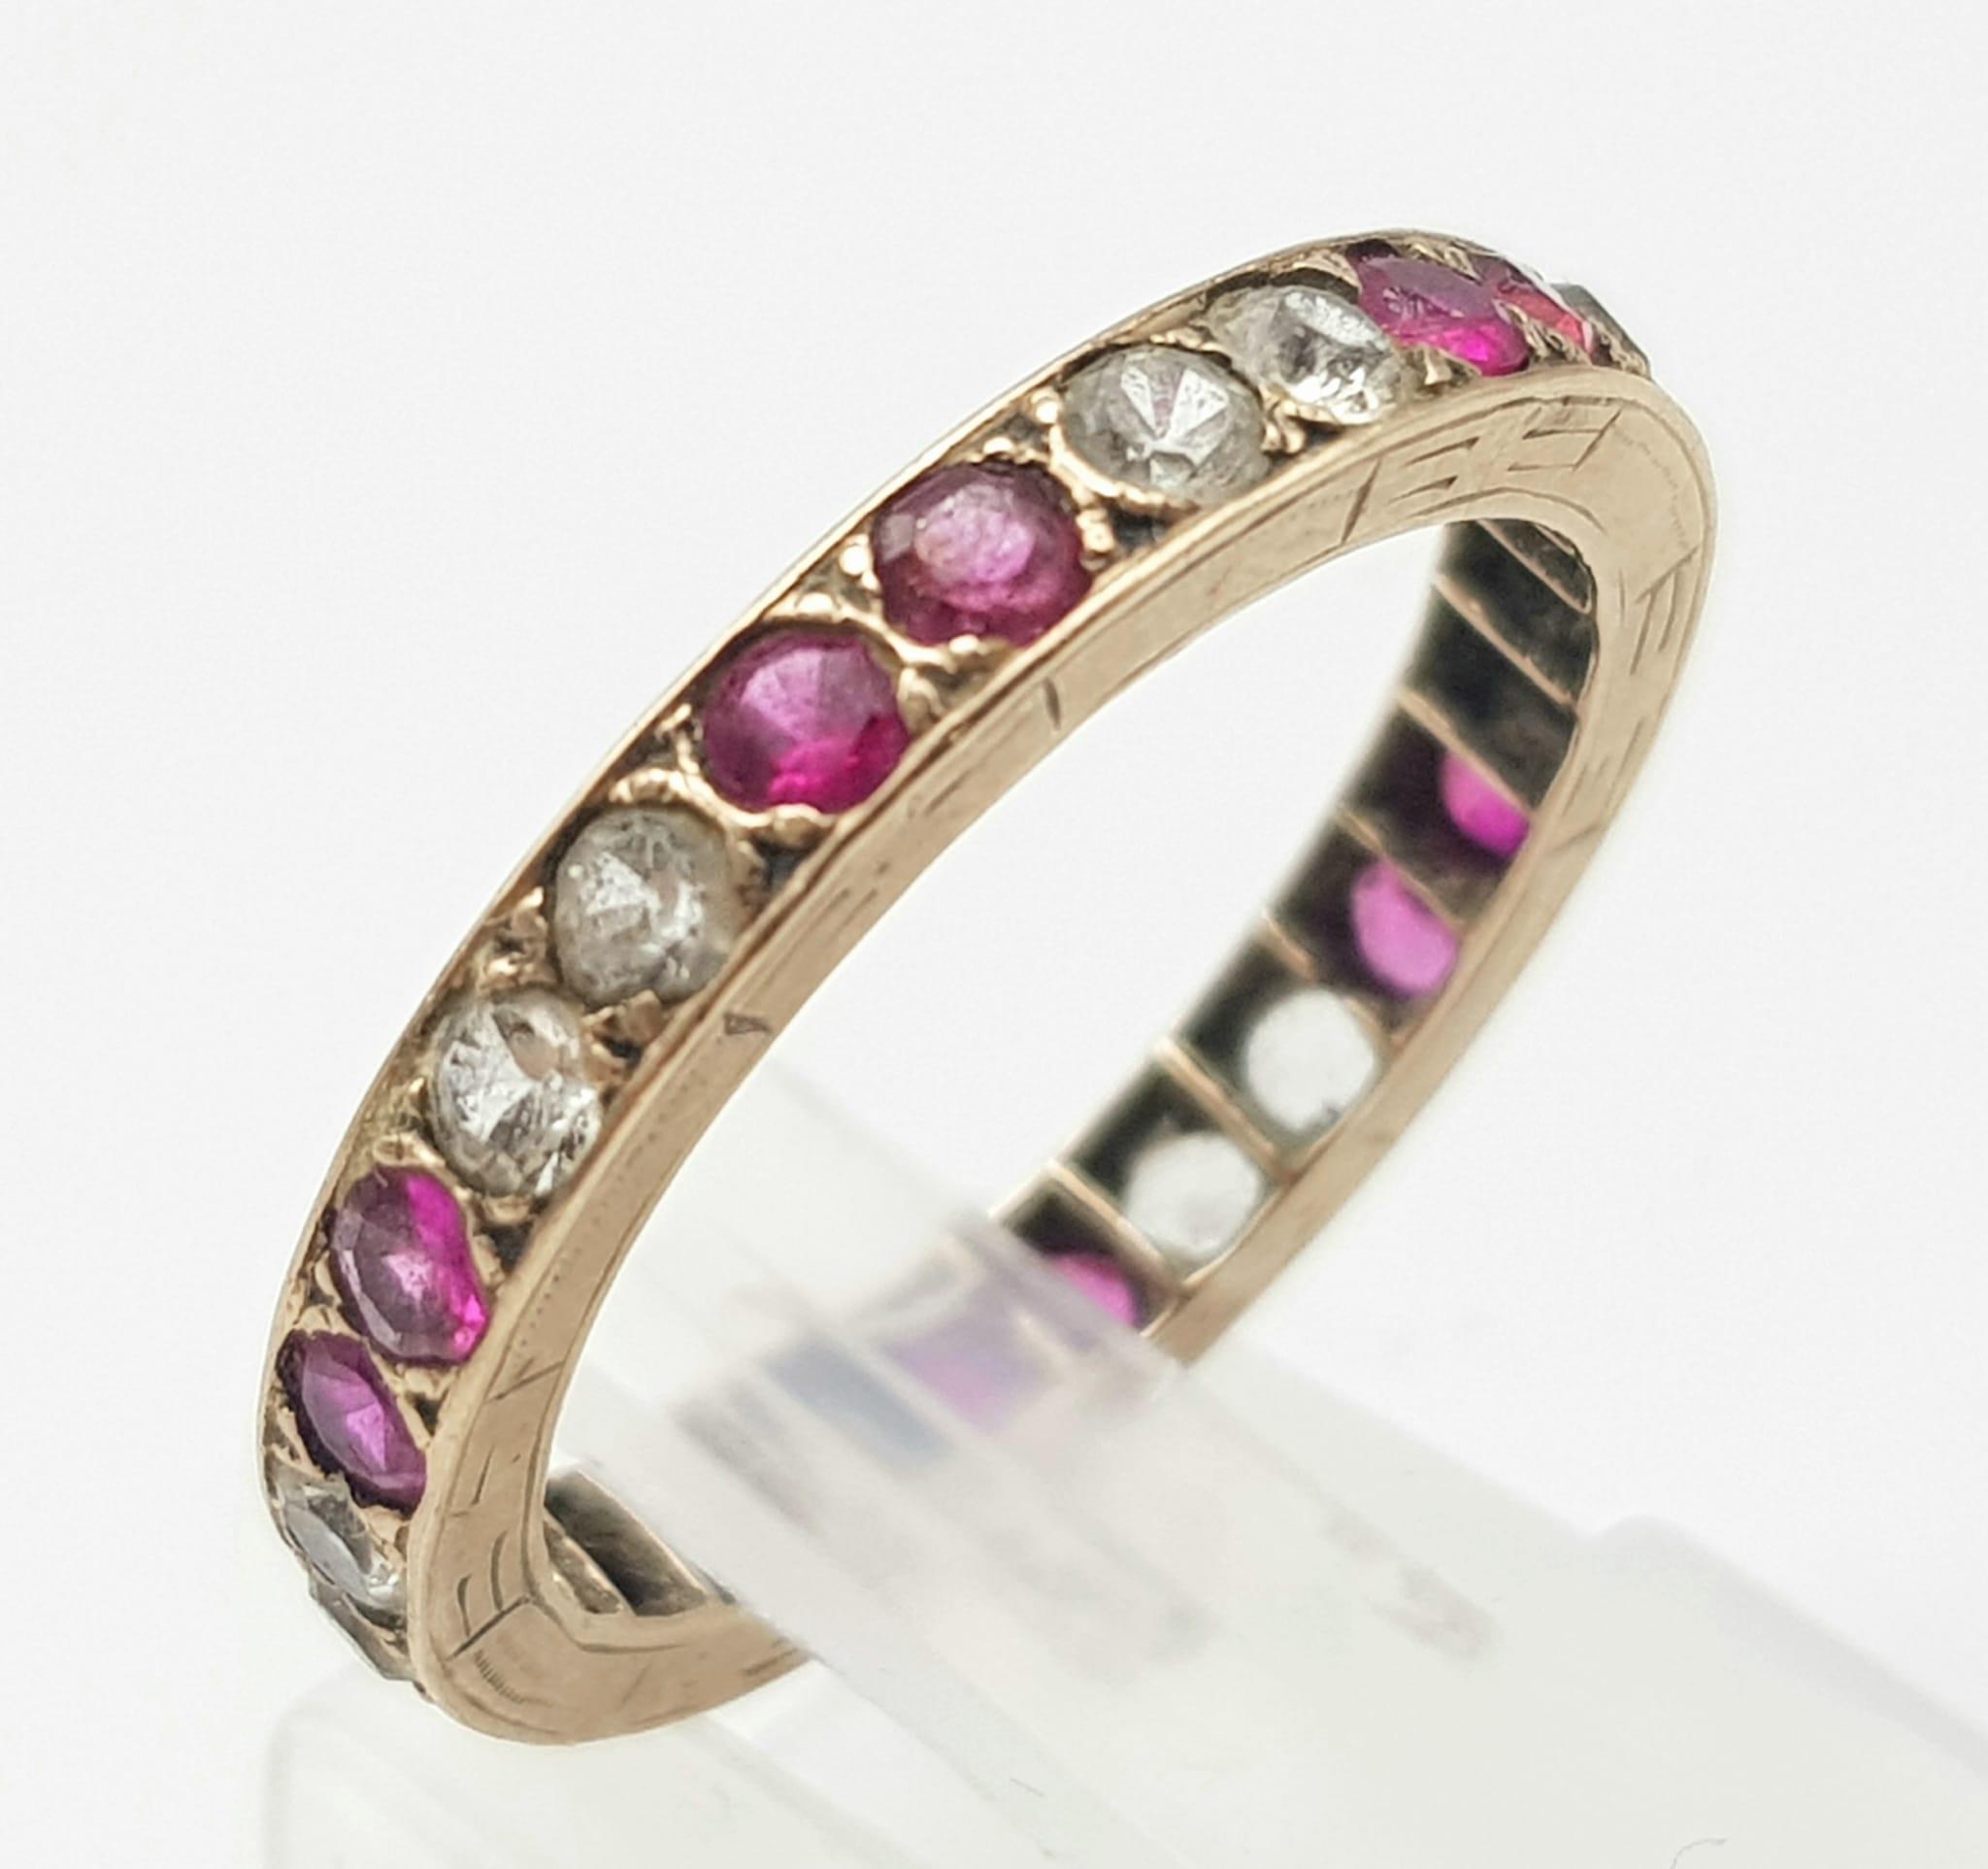 A 9K GOLD FULL ETERNITY RING WITH PINK RUBY AND WHITE SAPPHIRES , 2.1gms size N